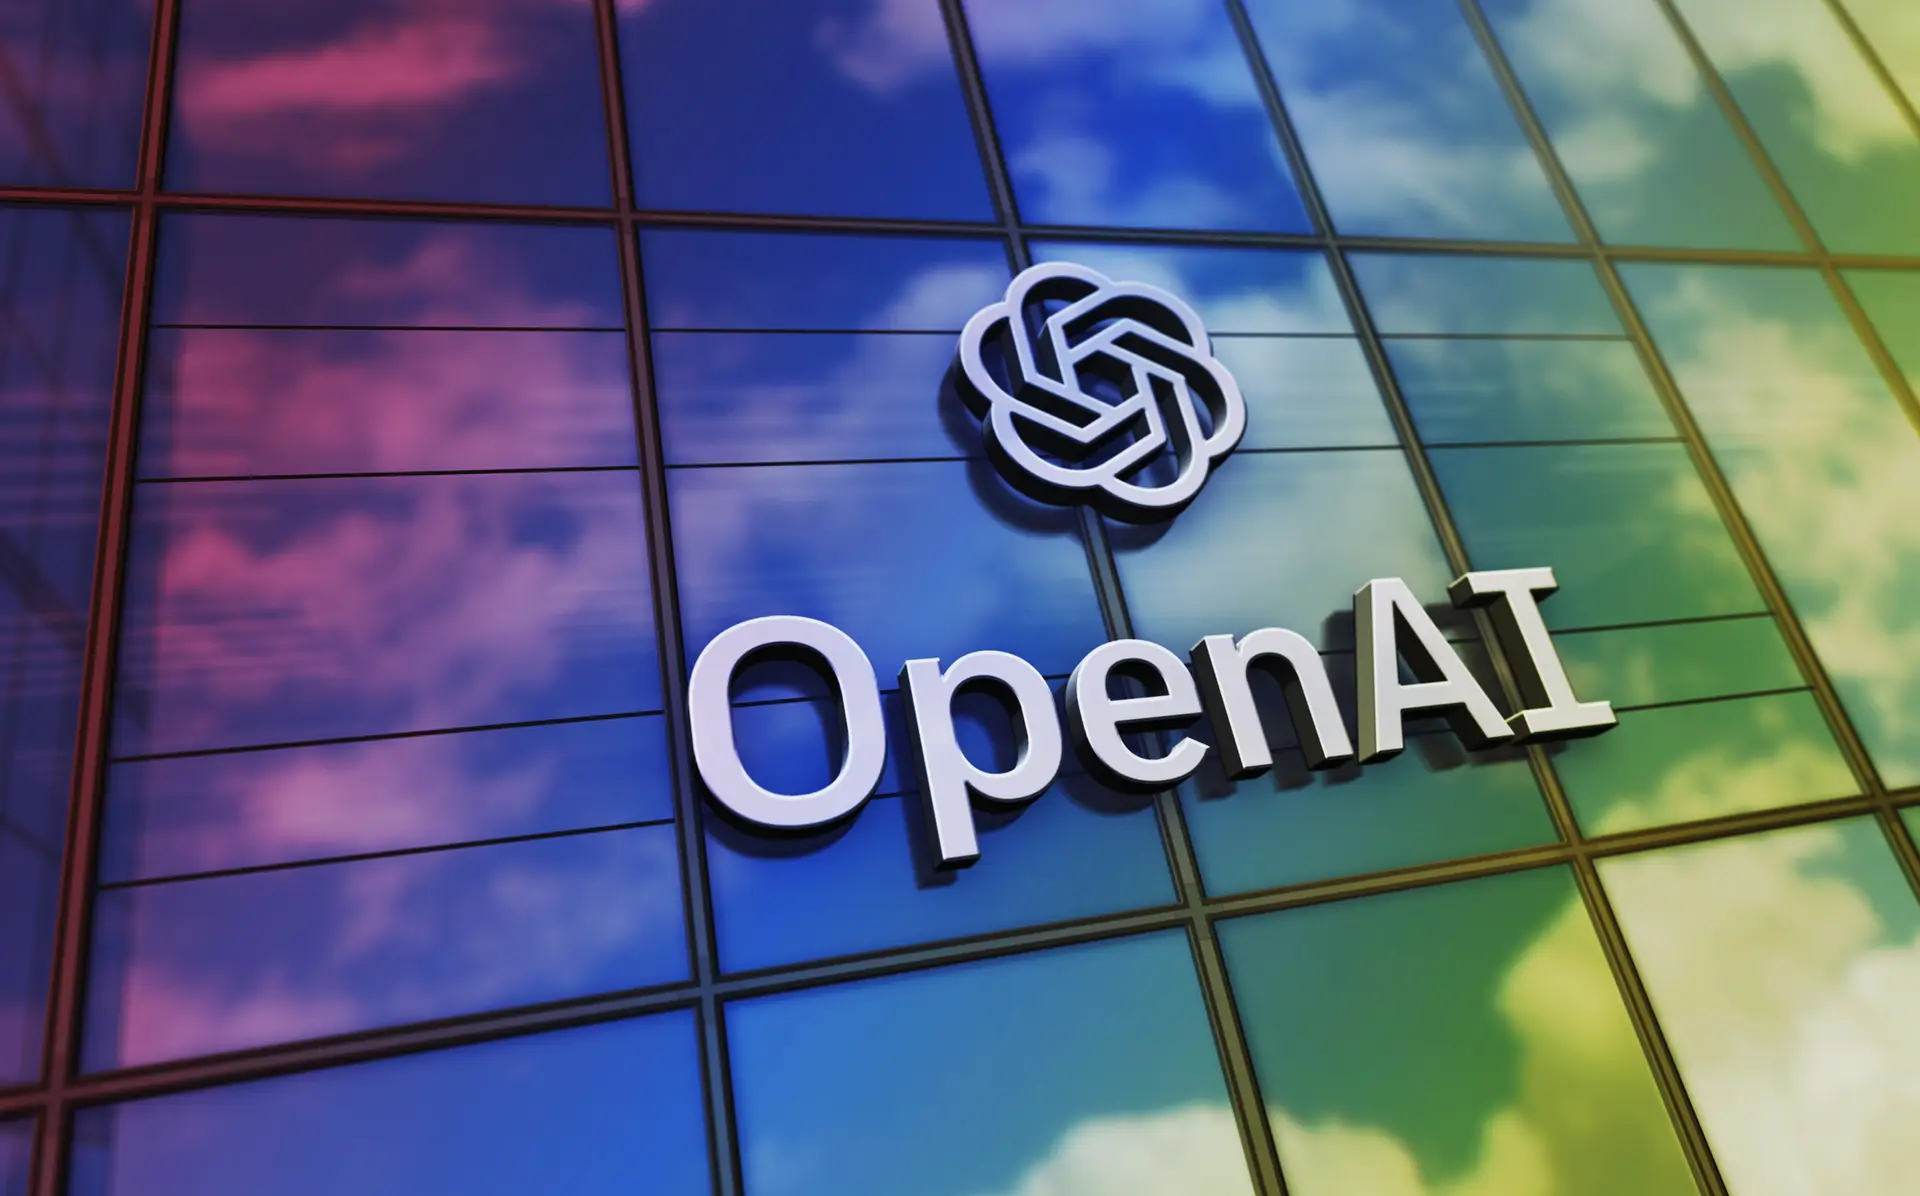 No OpenAI Transparency: Admits to Withholding Details on Model Architecture, Training Methods